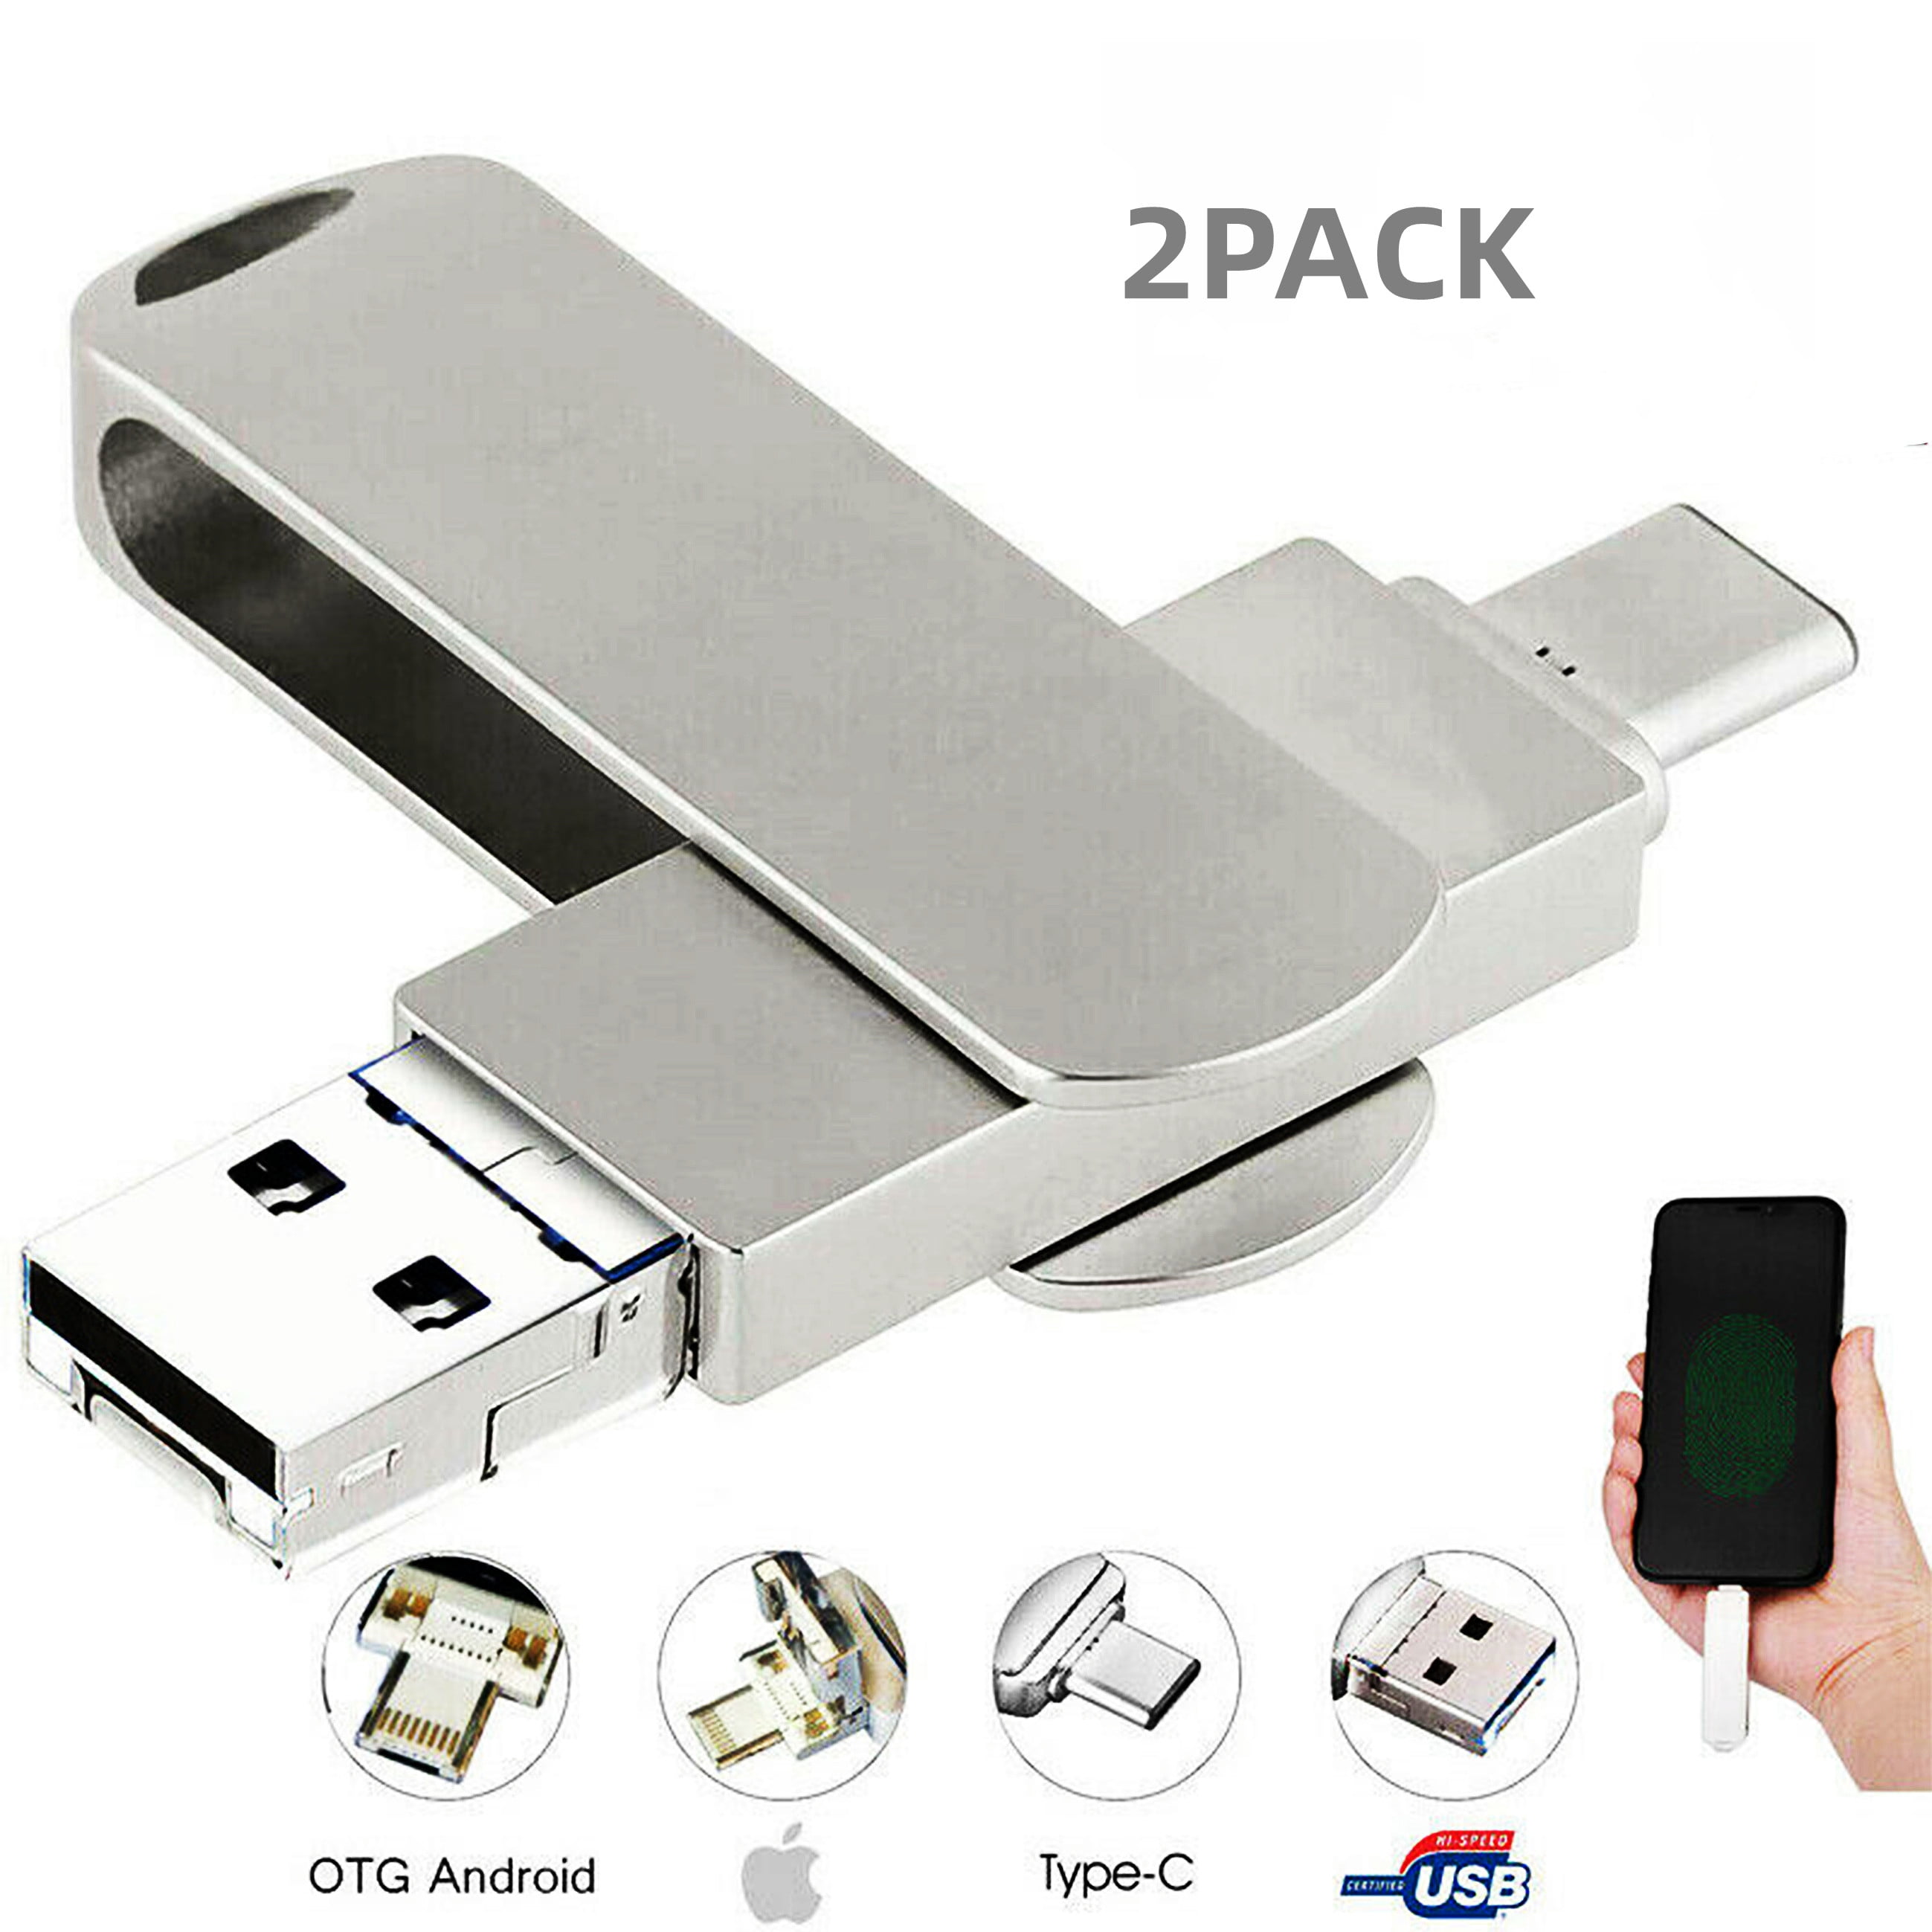 Jahy2Tech 1TB USB 3.0 Flash Drive Memory Stick Type C OTG Thumb For iPhone  iPad Android 